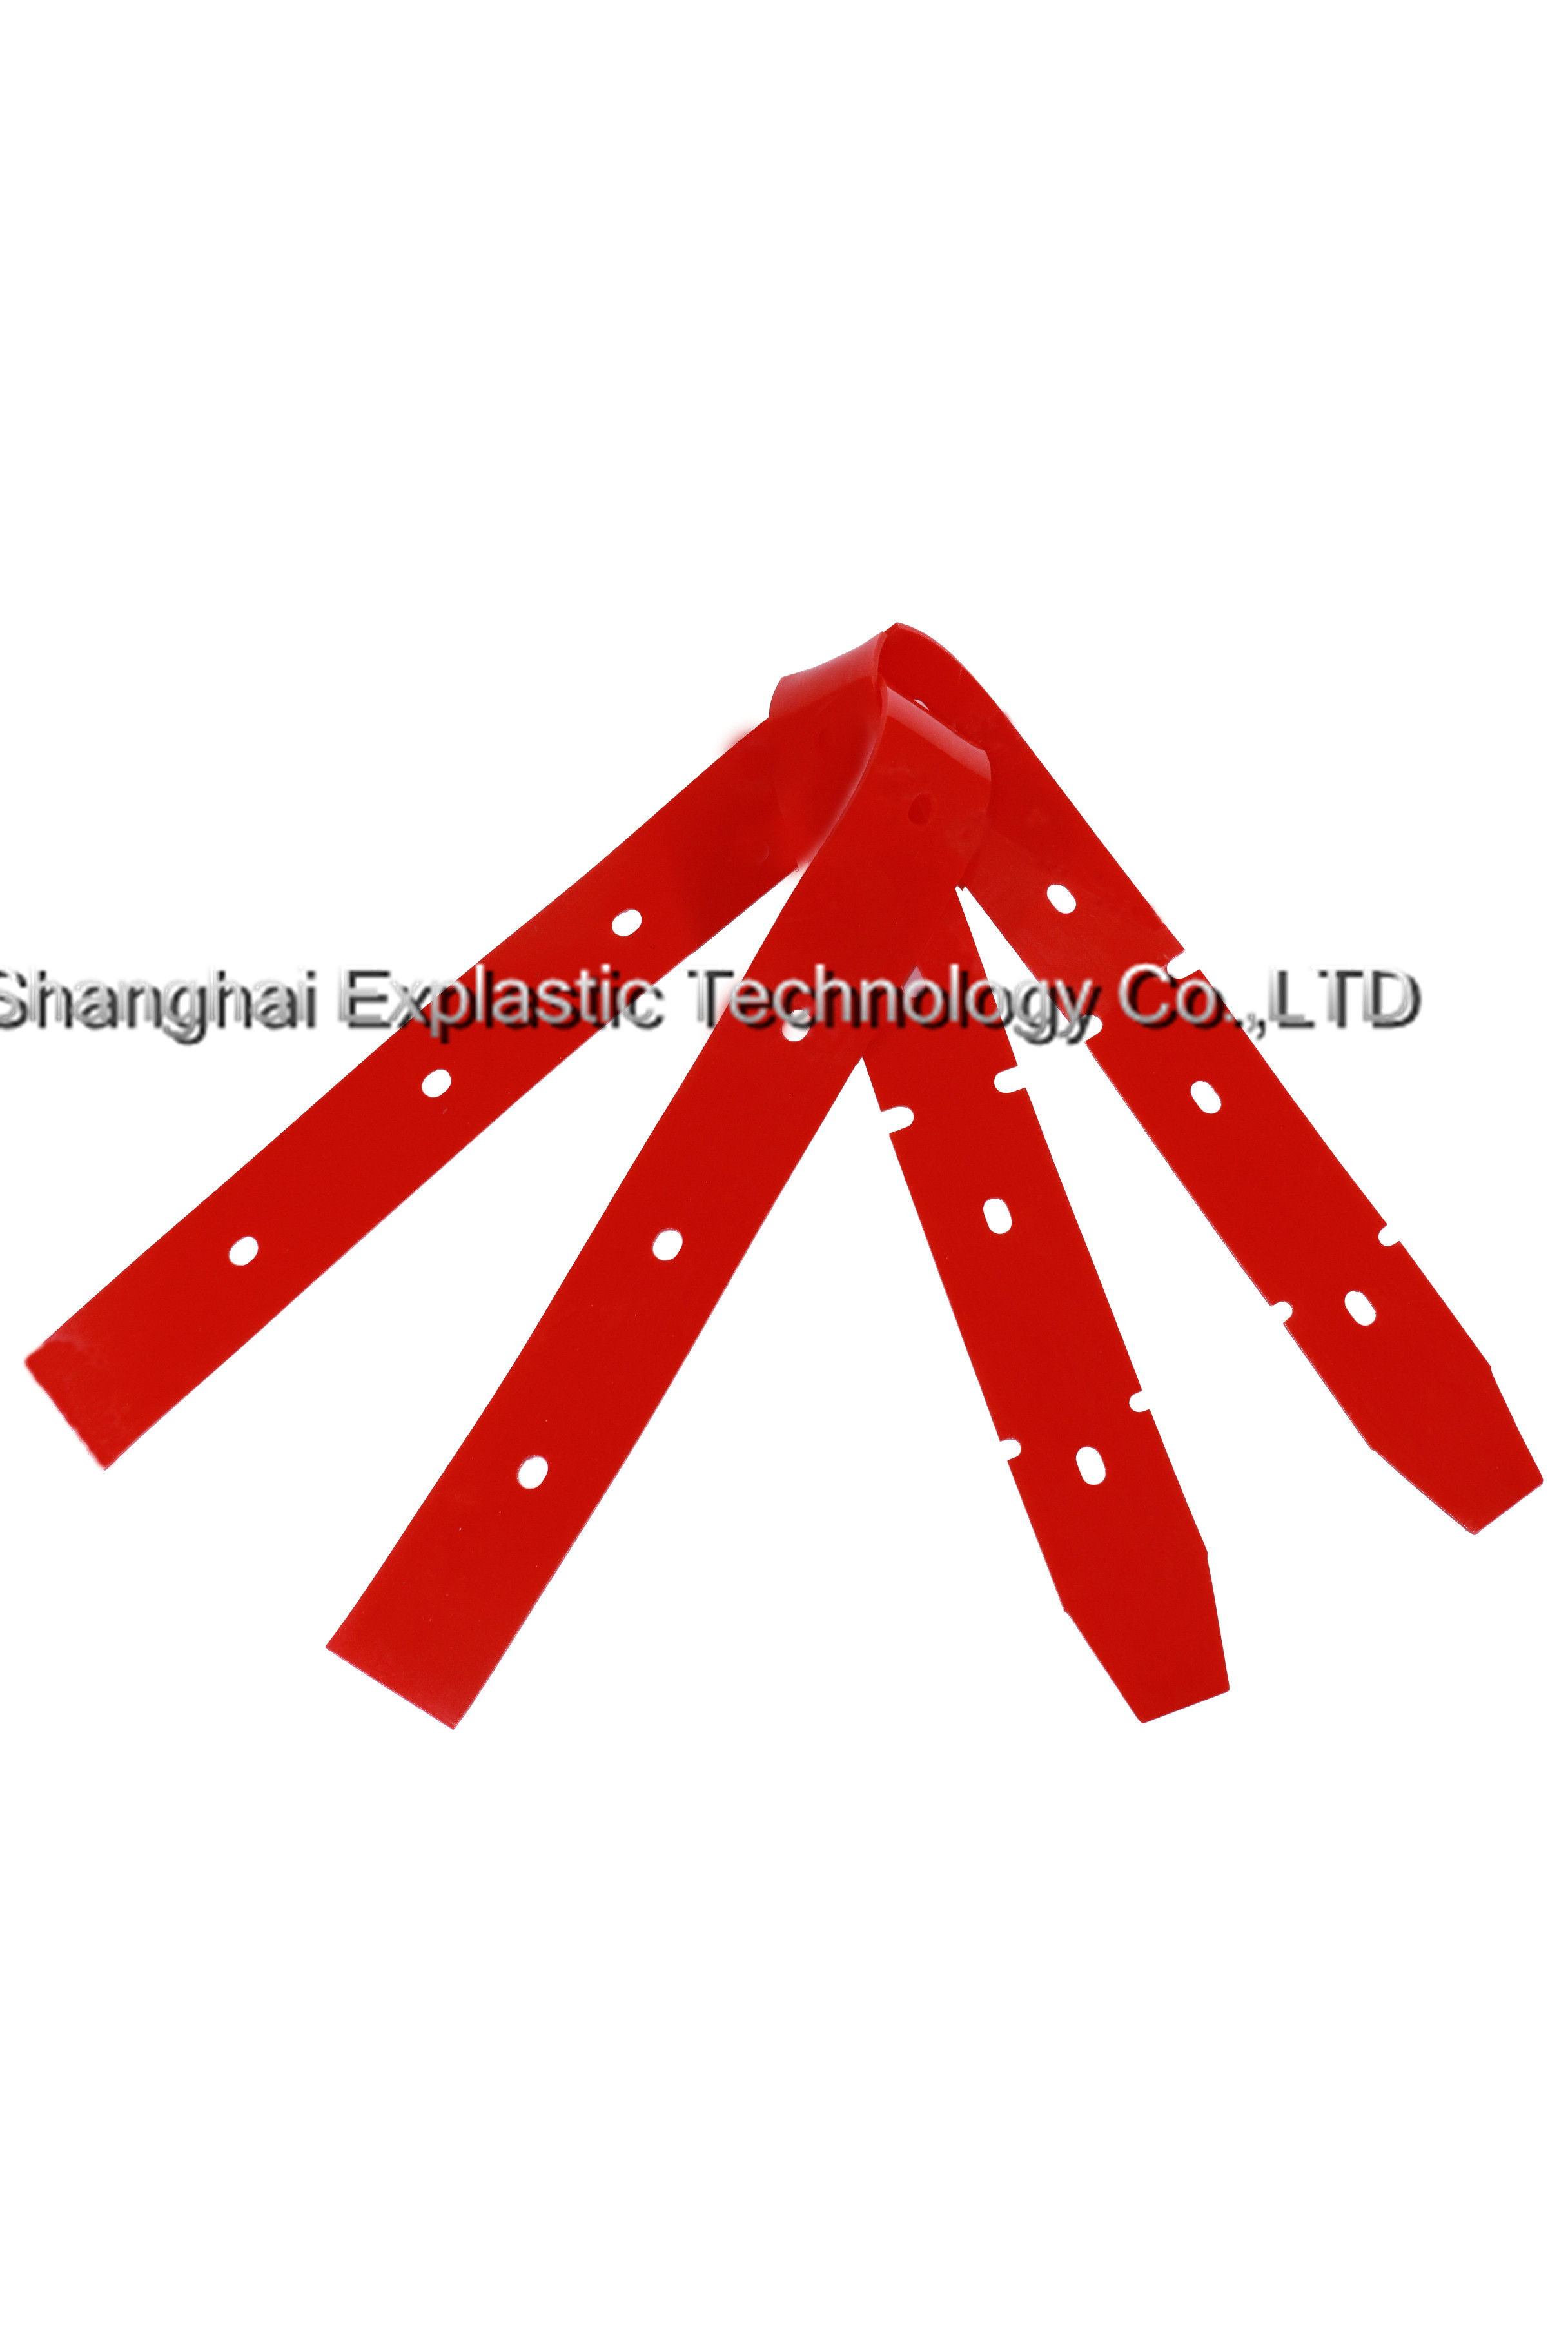 Scrubber squeegee,The characteristic of squeegee blade,Polyurethane floor scrubber squeegee blade